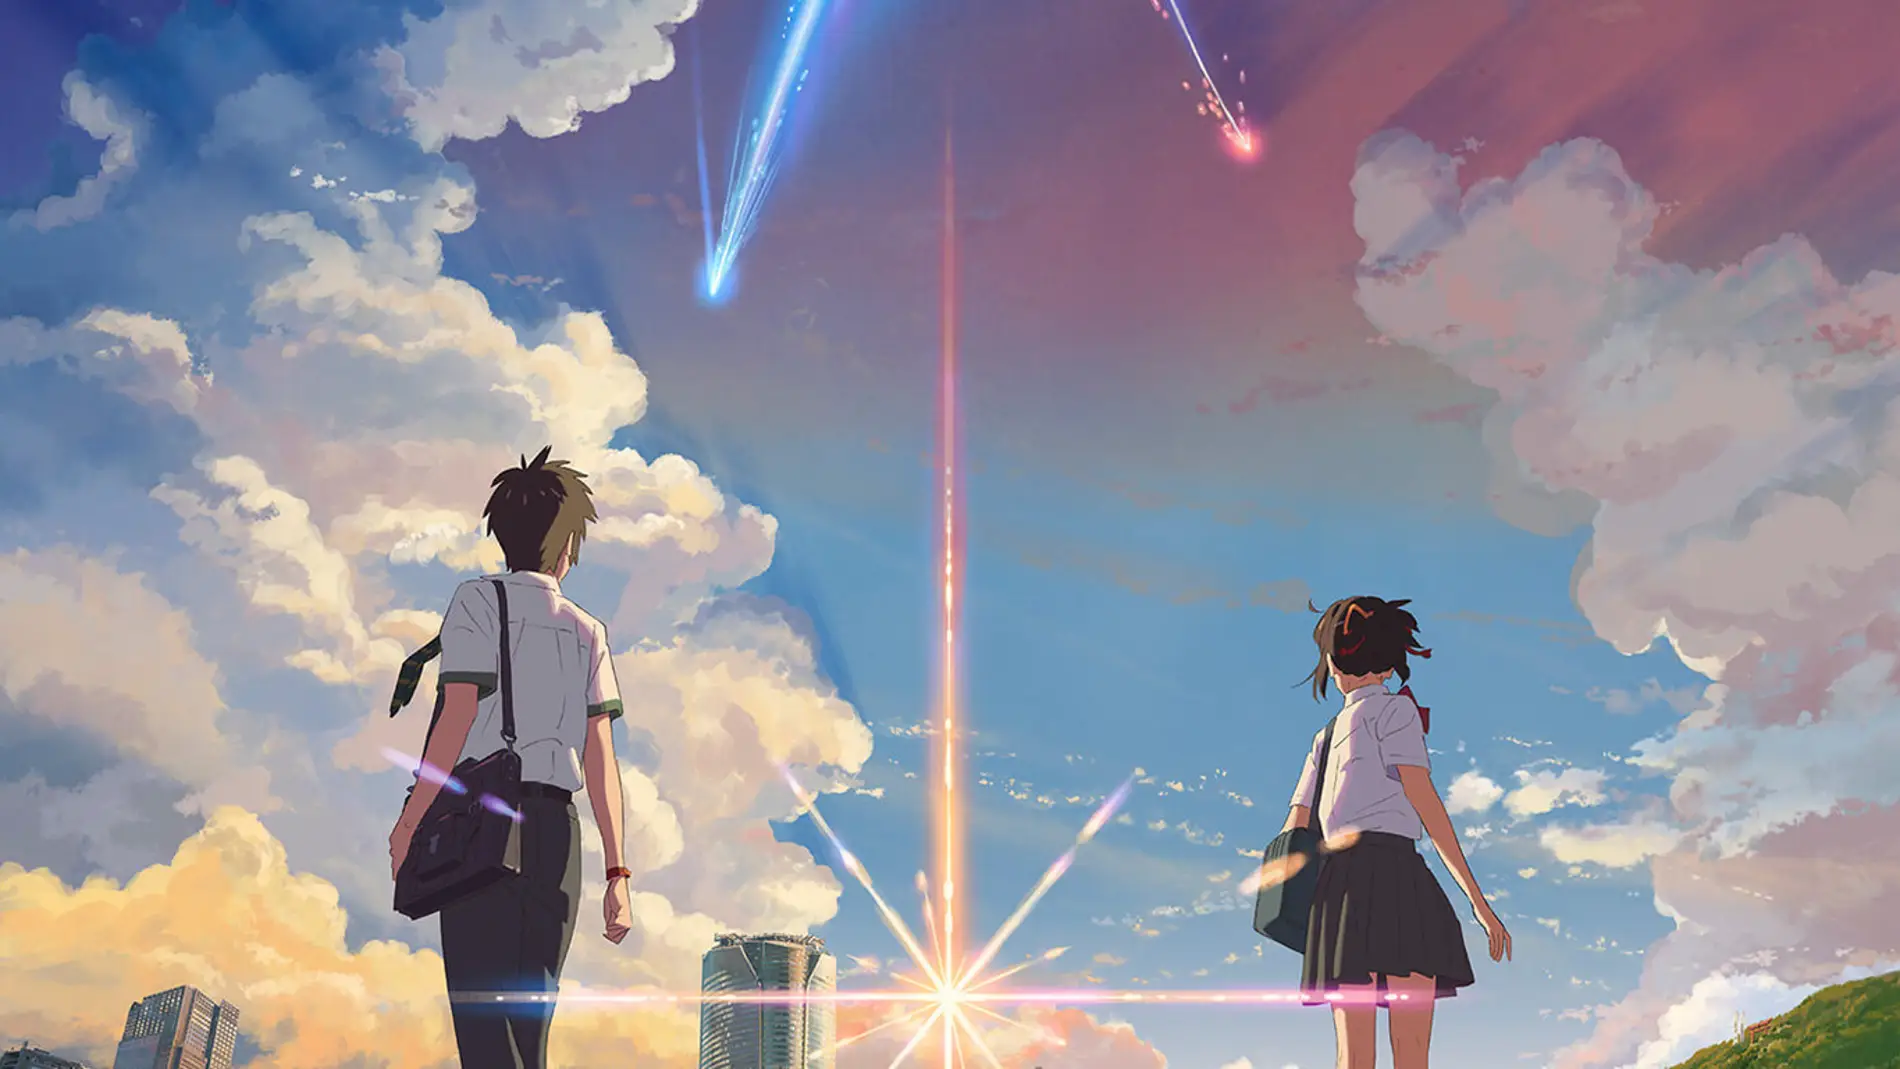 your name 98